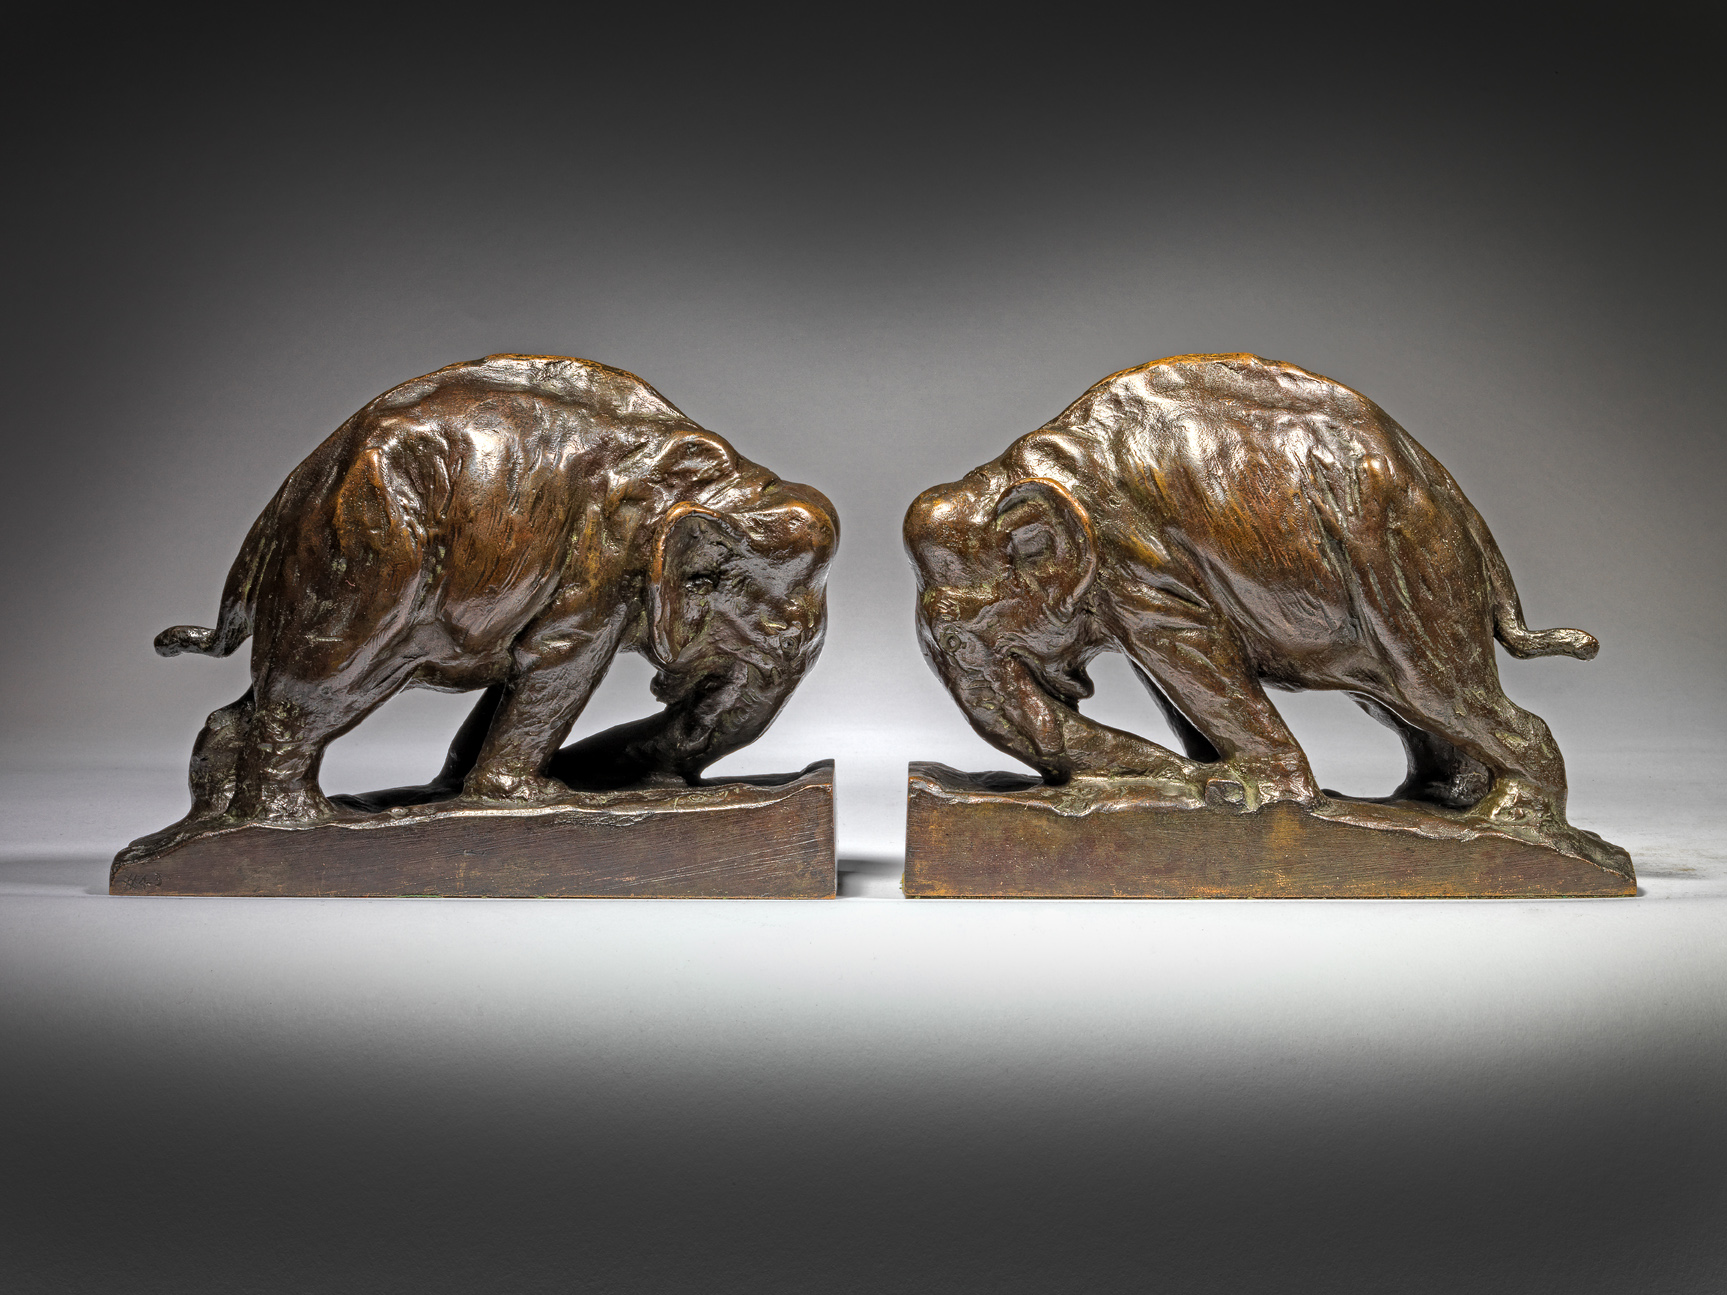 A pair of Elephant Bookends, c. 1925